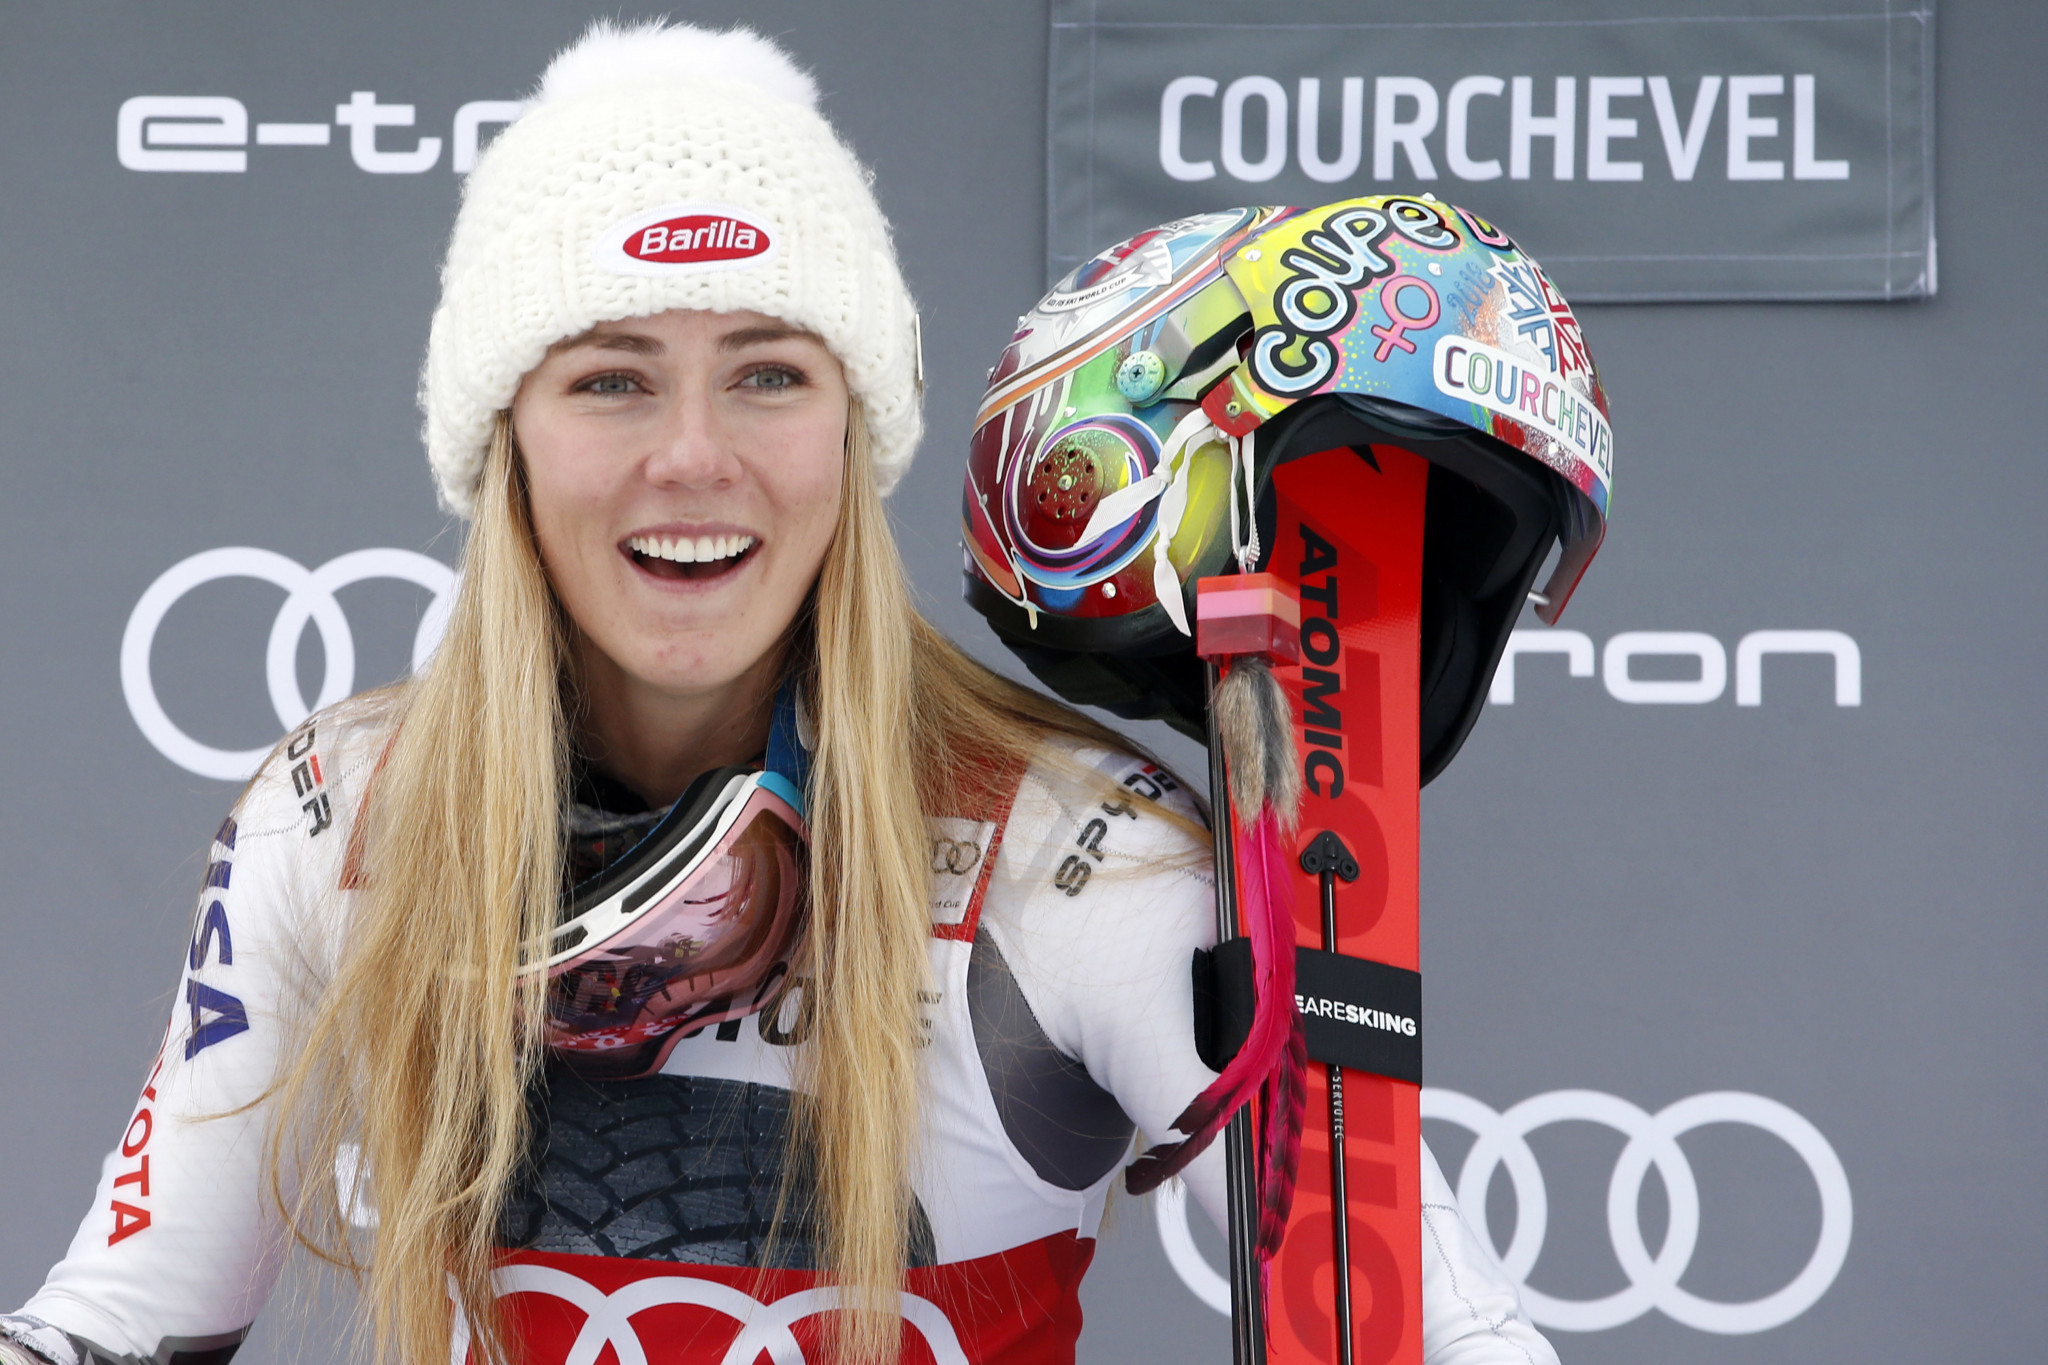 Mikaela Shiffrin has continued her unbeatable form with another win in Courchevel ©Getty Images